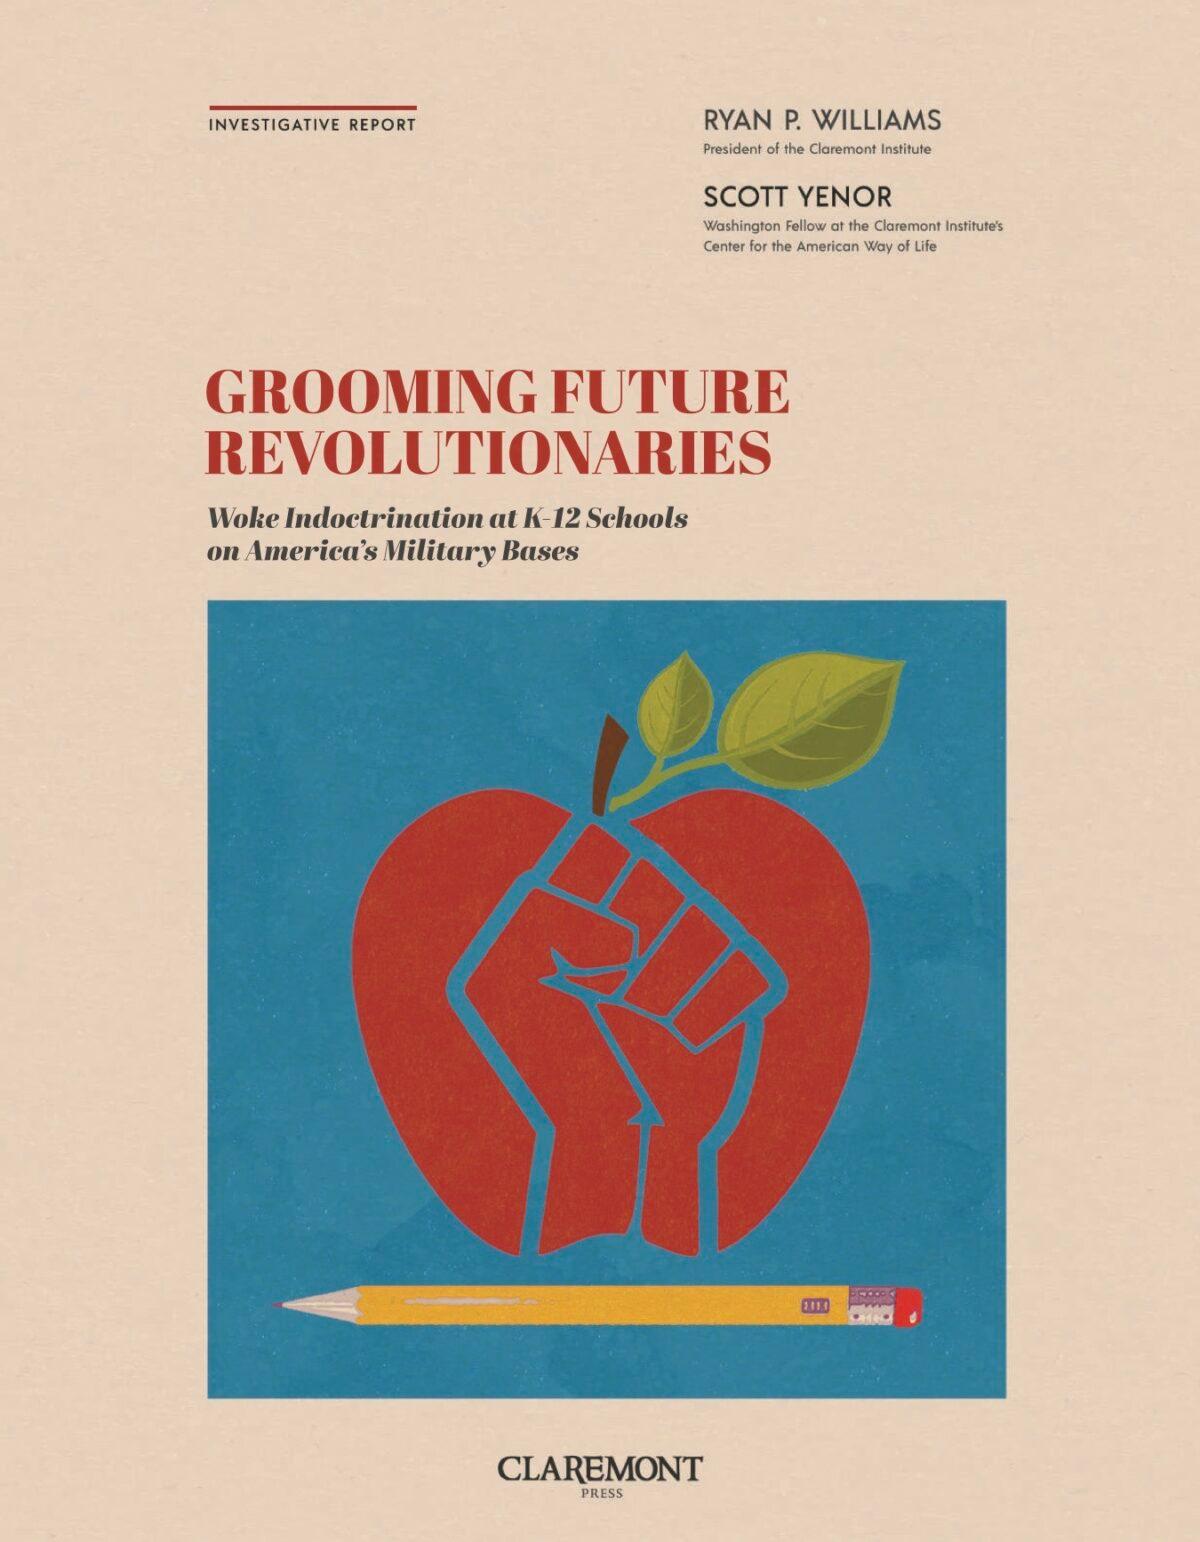 The cover of the Claremont Institute's new report, "Grooming Future Revolutionaries." Screenshot taken on Sept. 27, 2022. (Jackson Elliott/ The Epoch Times)